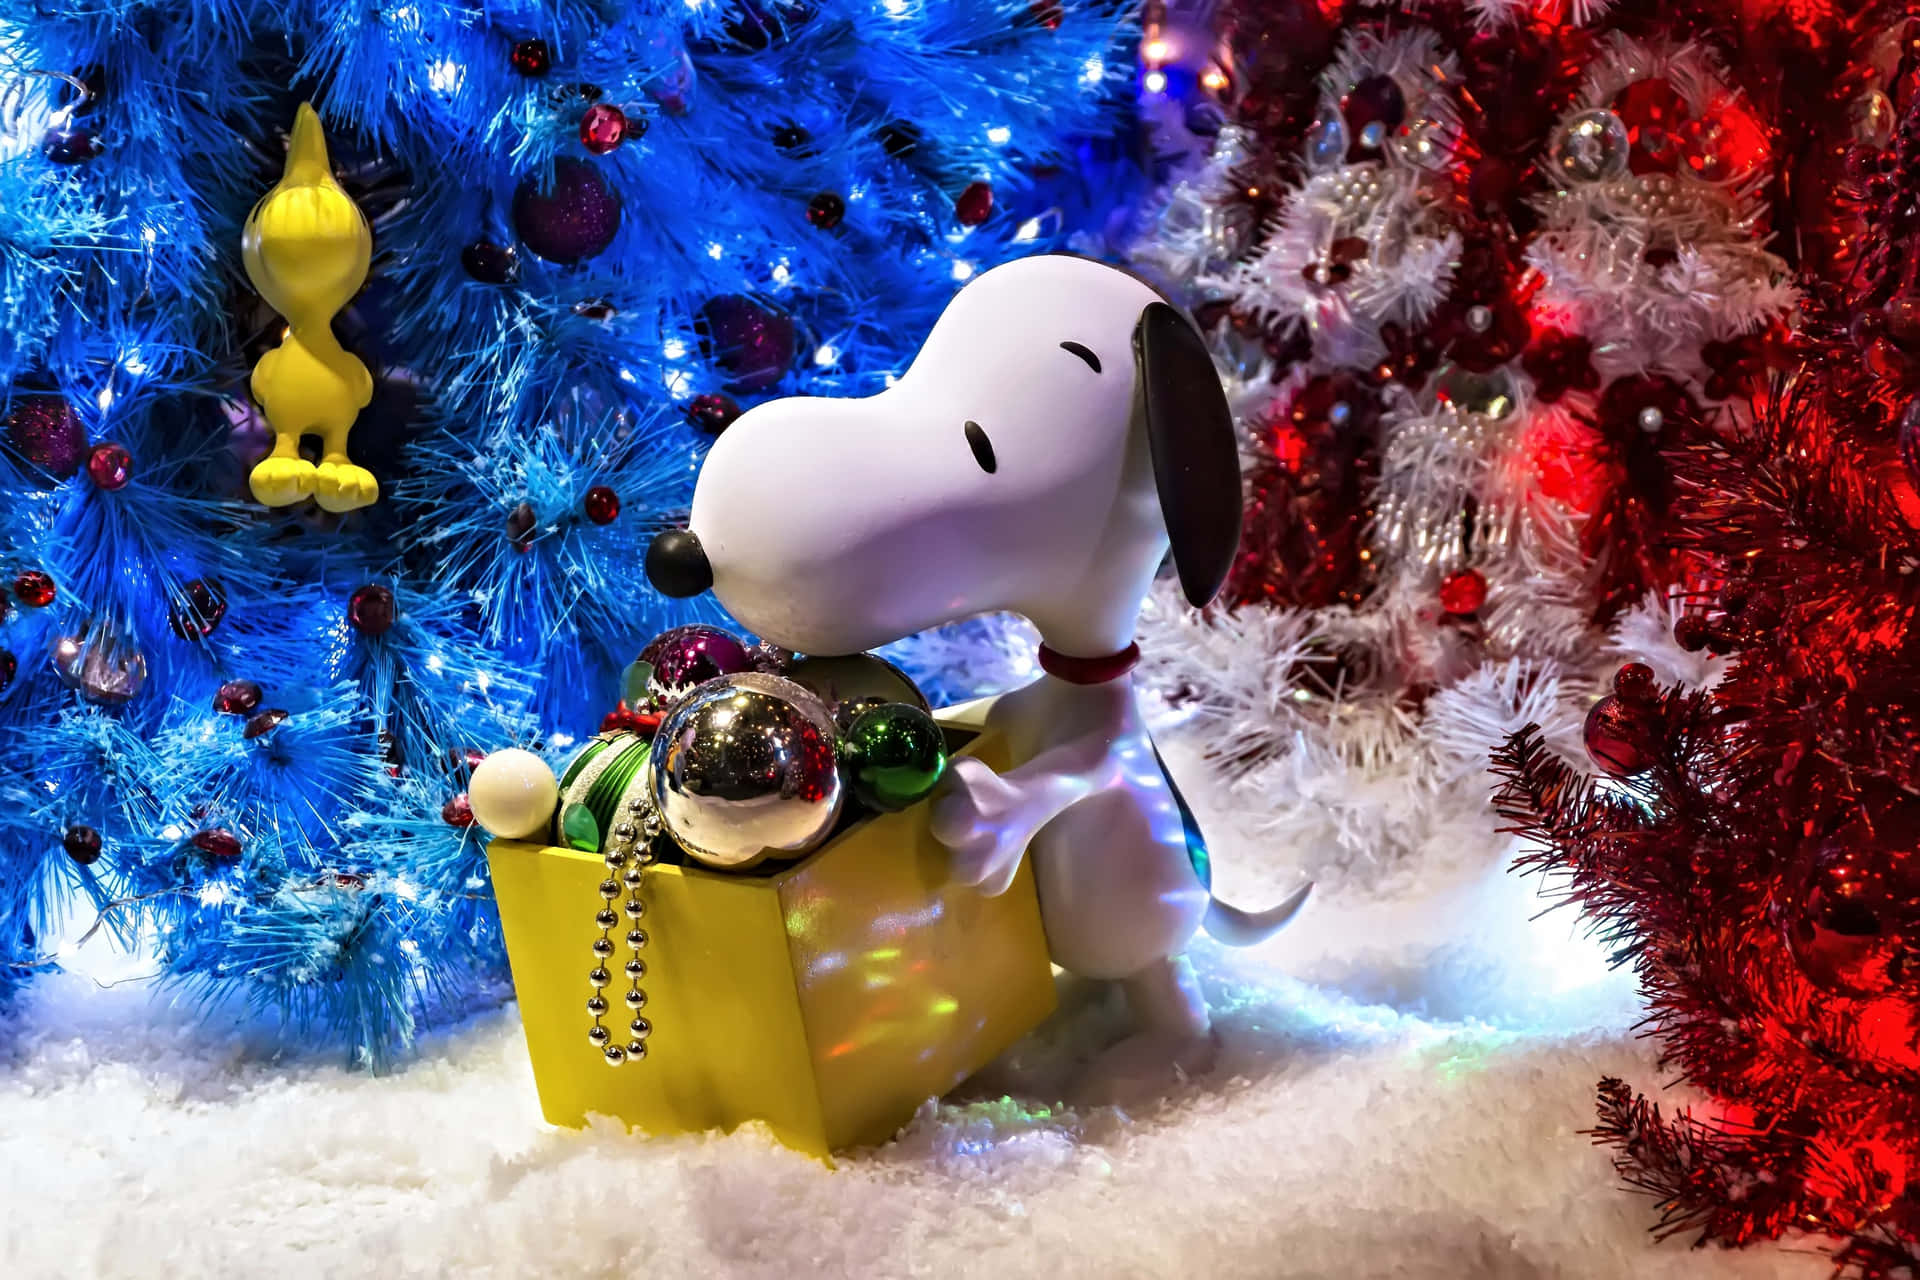 Celebrate Christmas With Your Family And The Peanuts Gang! Background